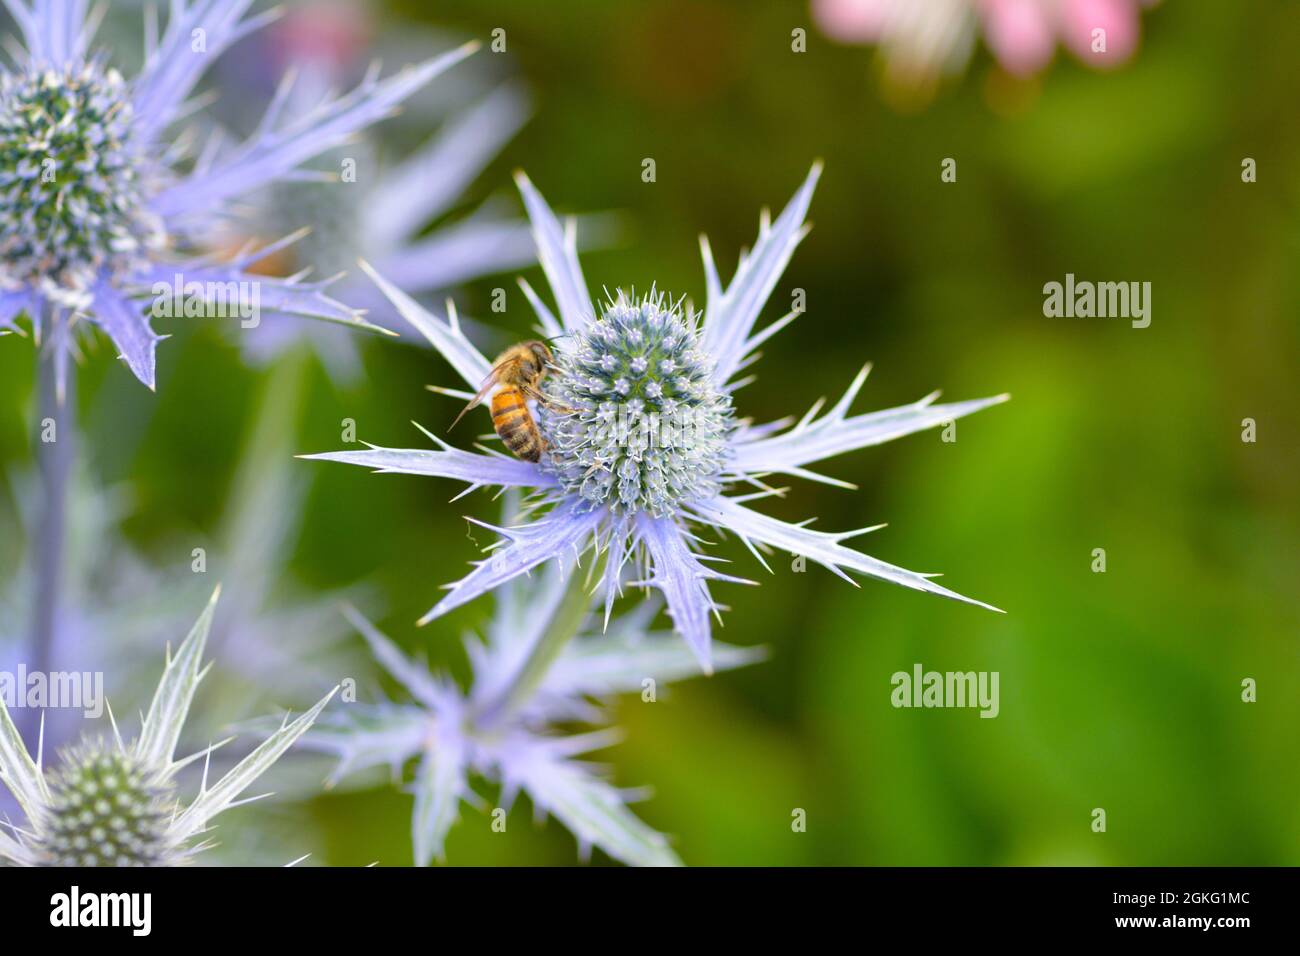 Closeup of curious wasp on blue coloured thistle with a green, garden background. Stock Photo